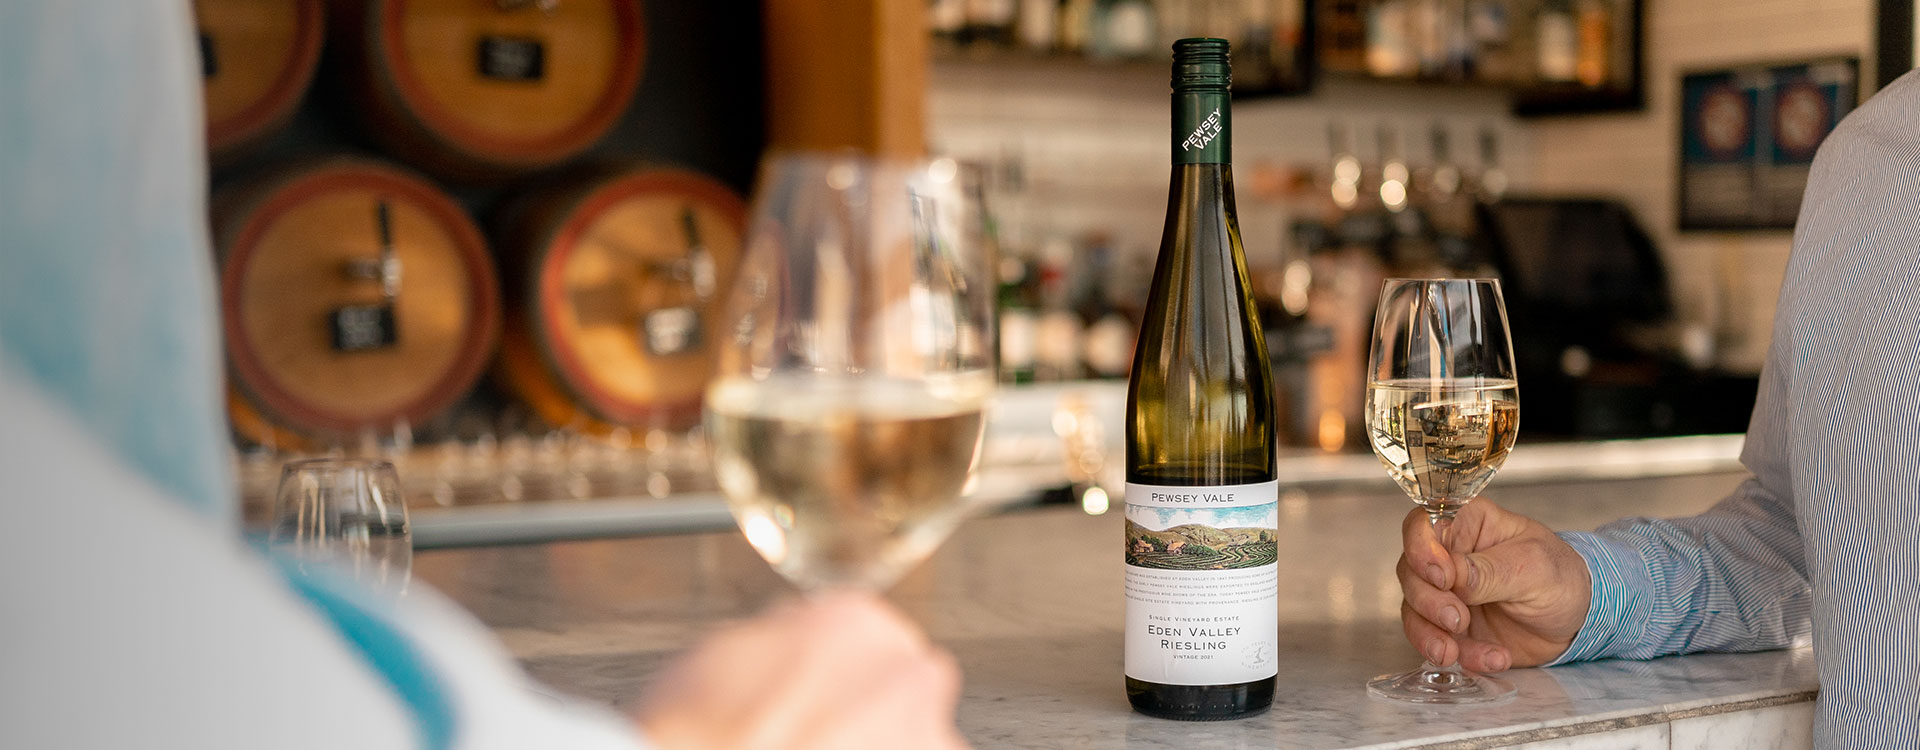 Eden Valley Riesling by Pewsey Vale Vineyard